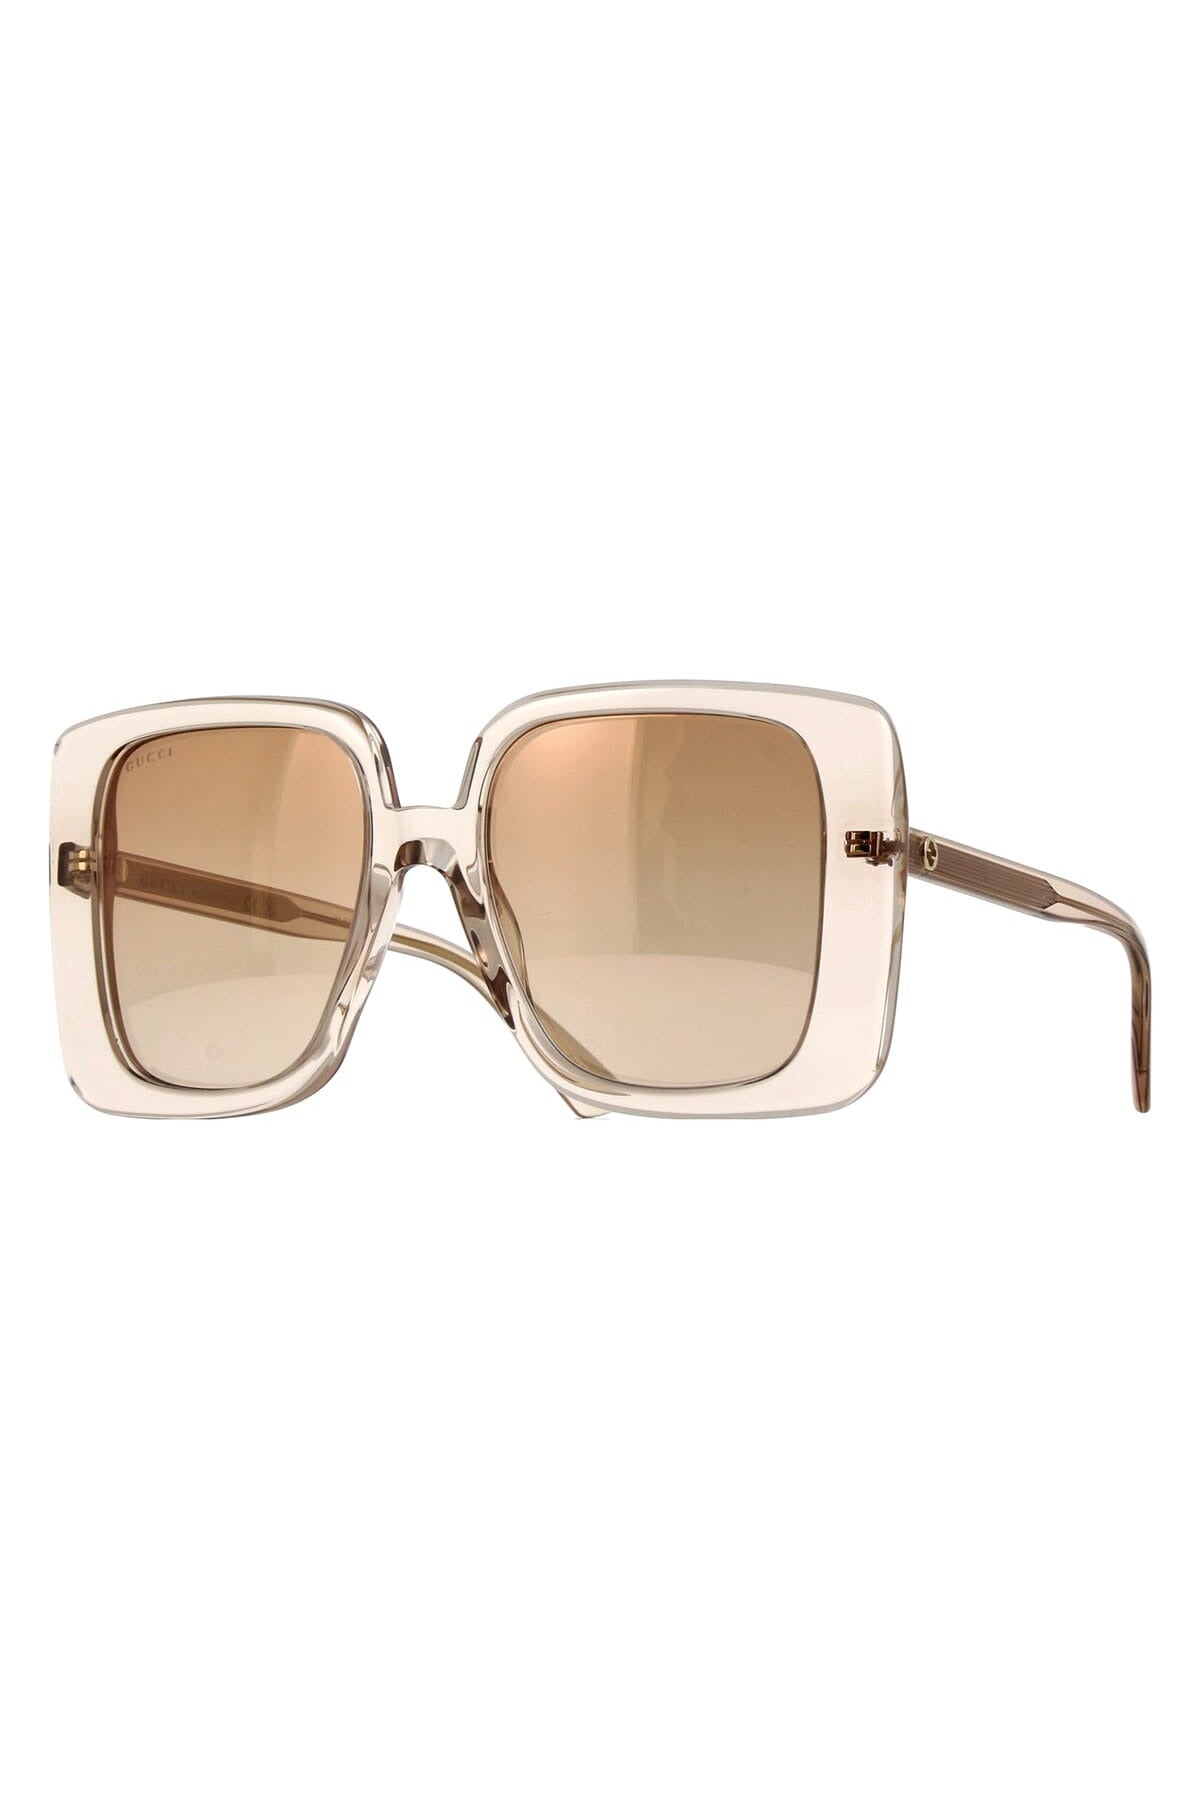 GUCCI-Oversized Rectangle Sunglasses-BEIGE/BROWN